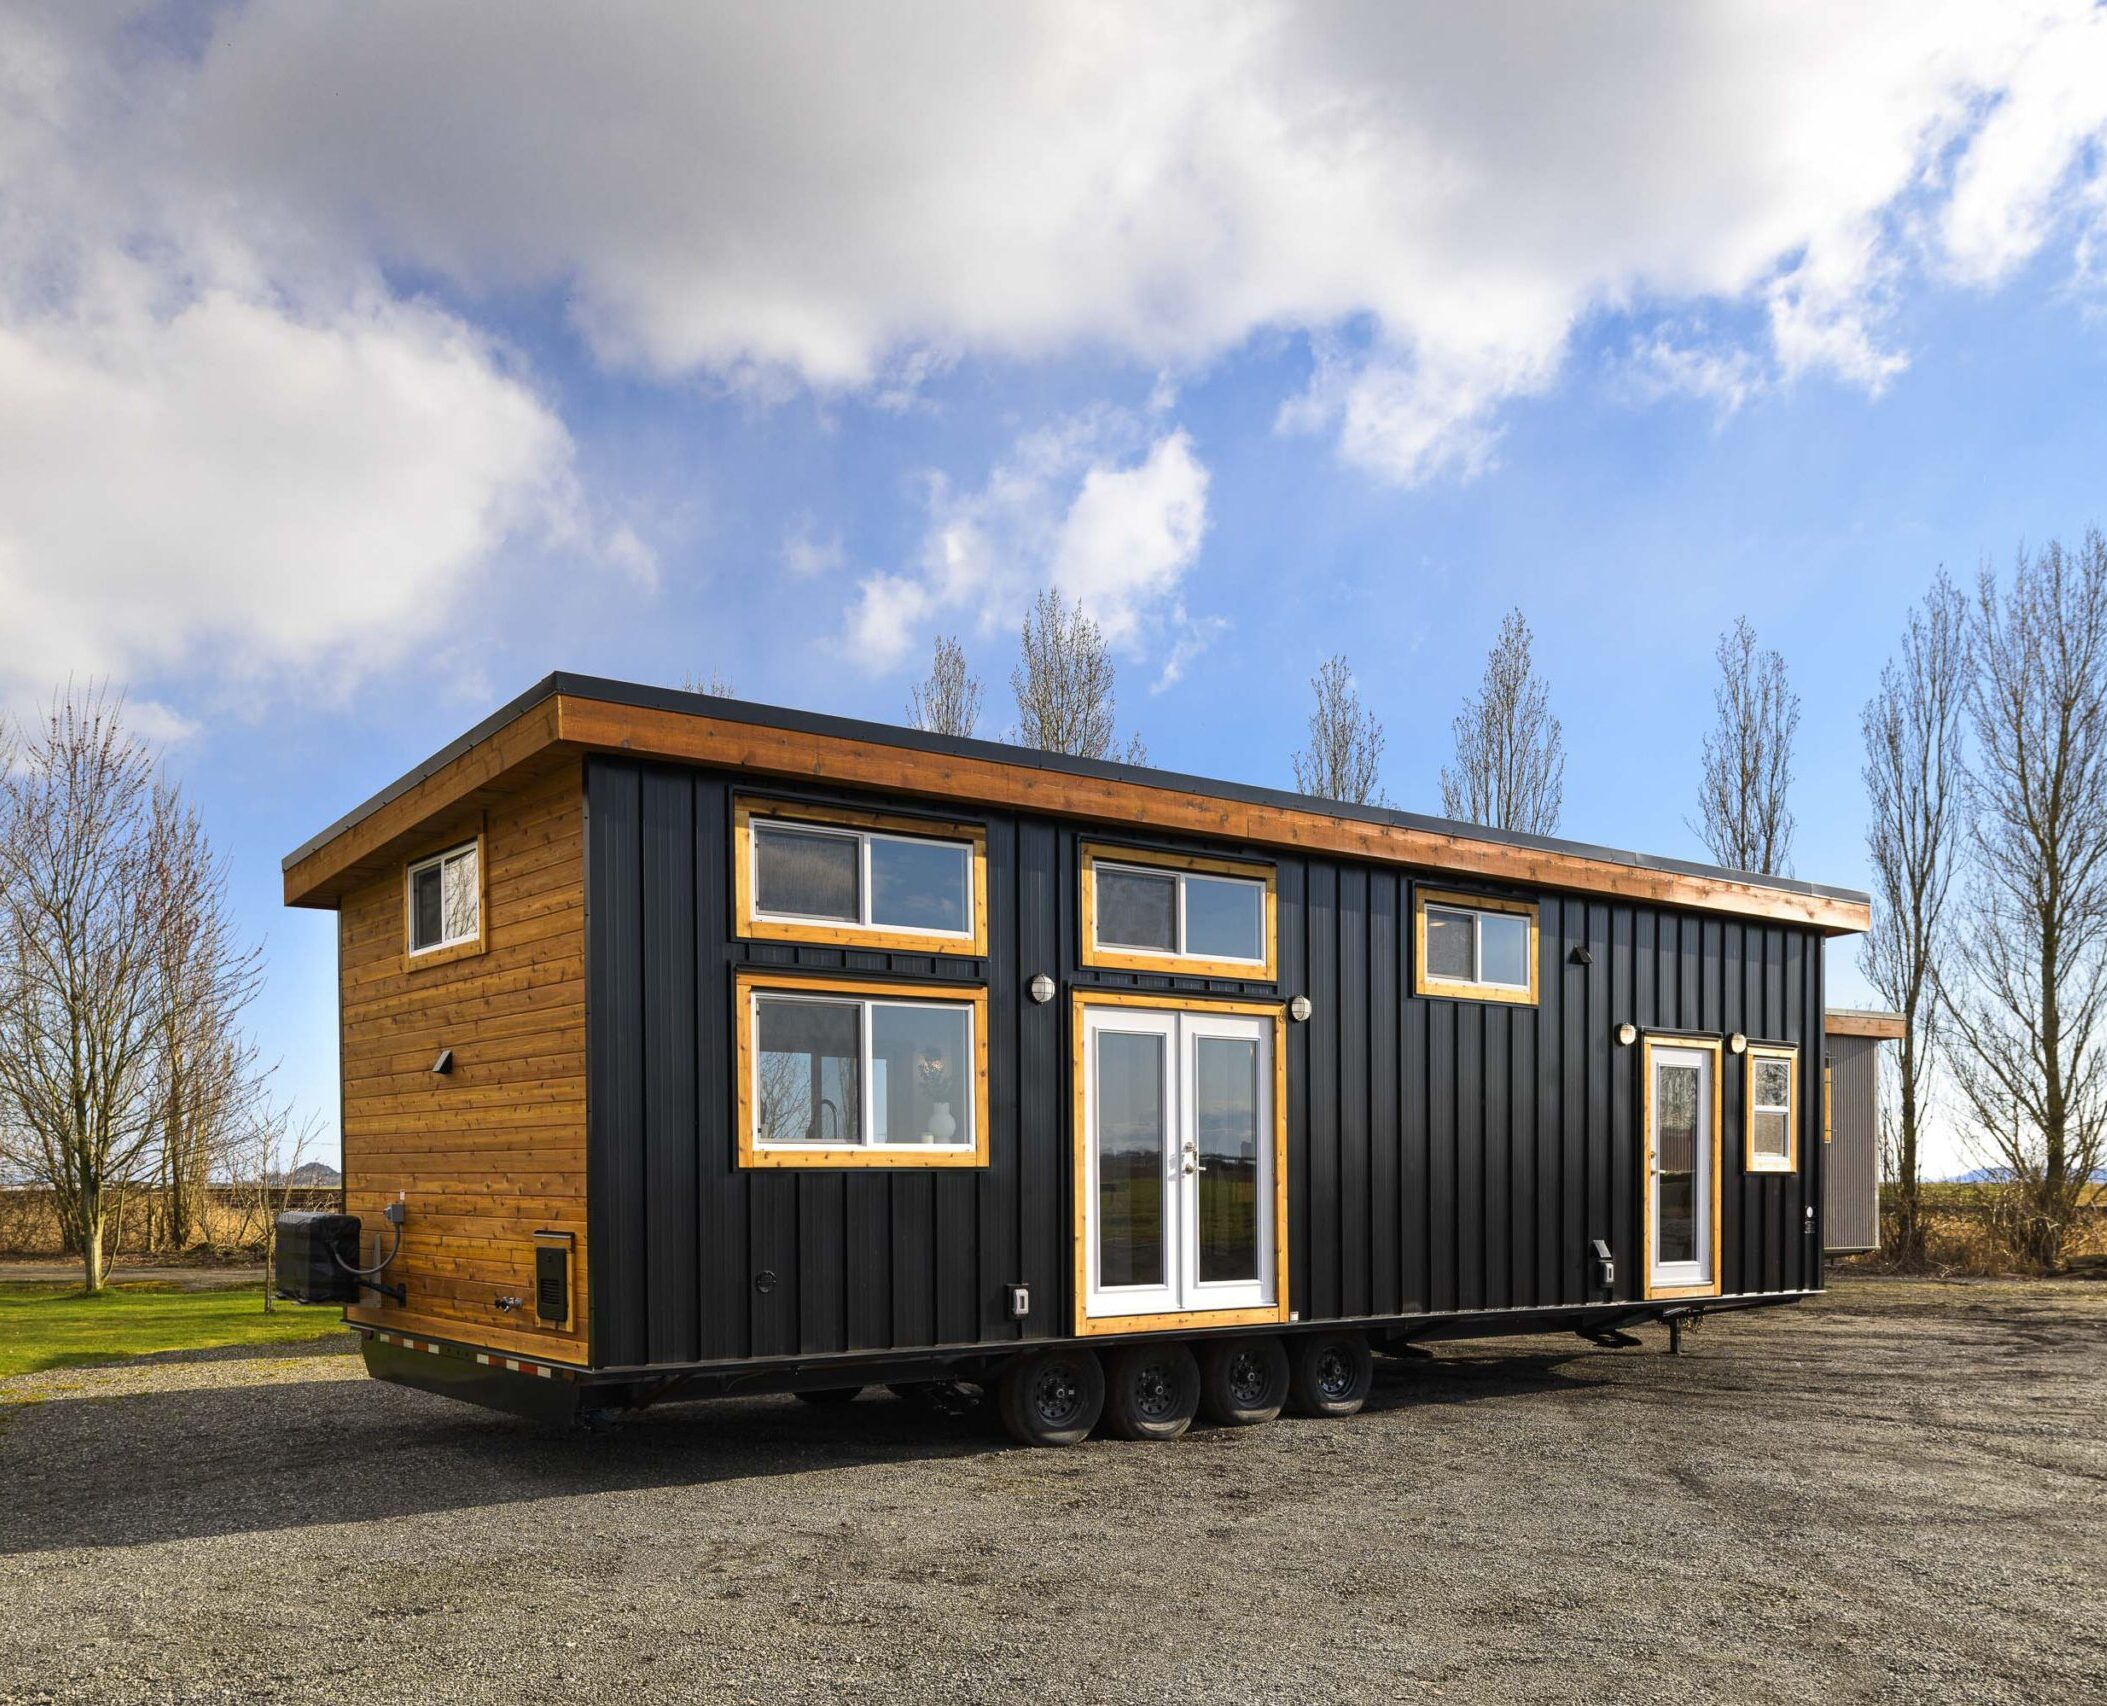 20 Tiny Home Manufacturers to Match Any Budget